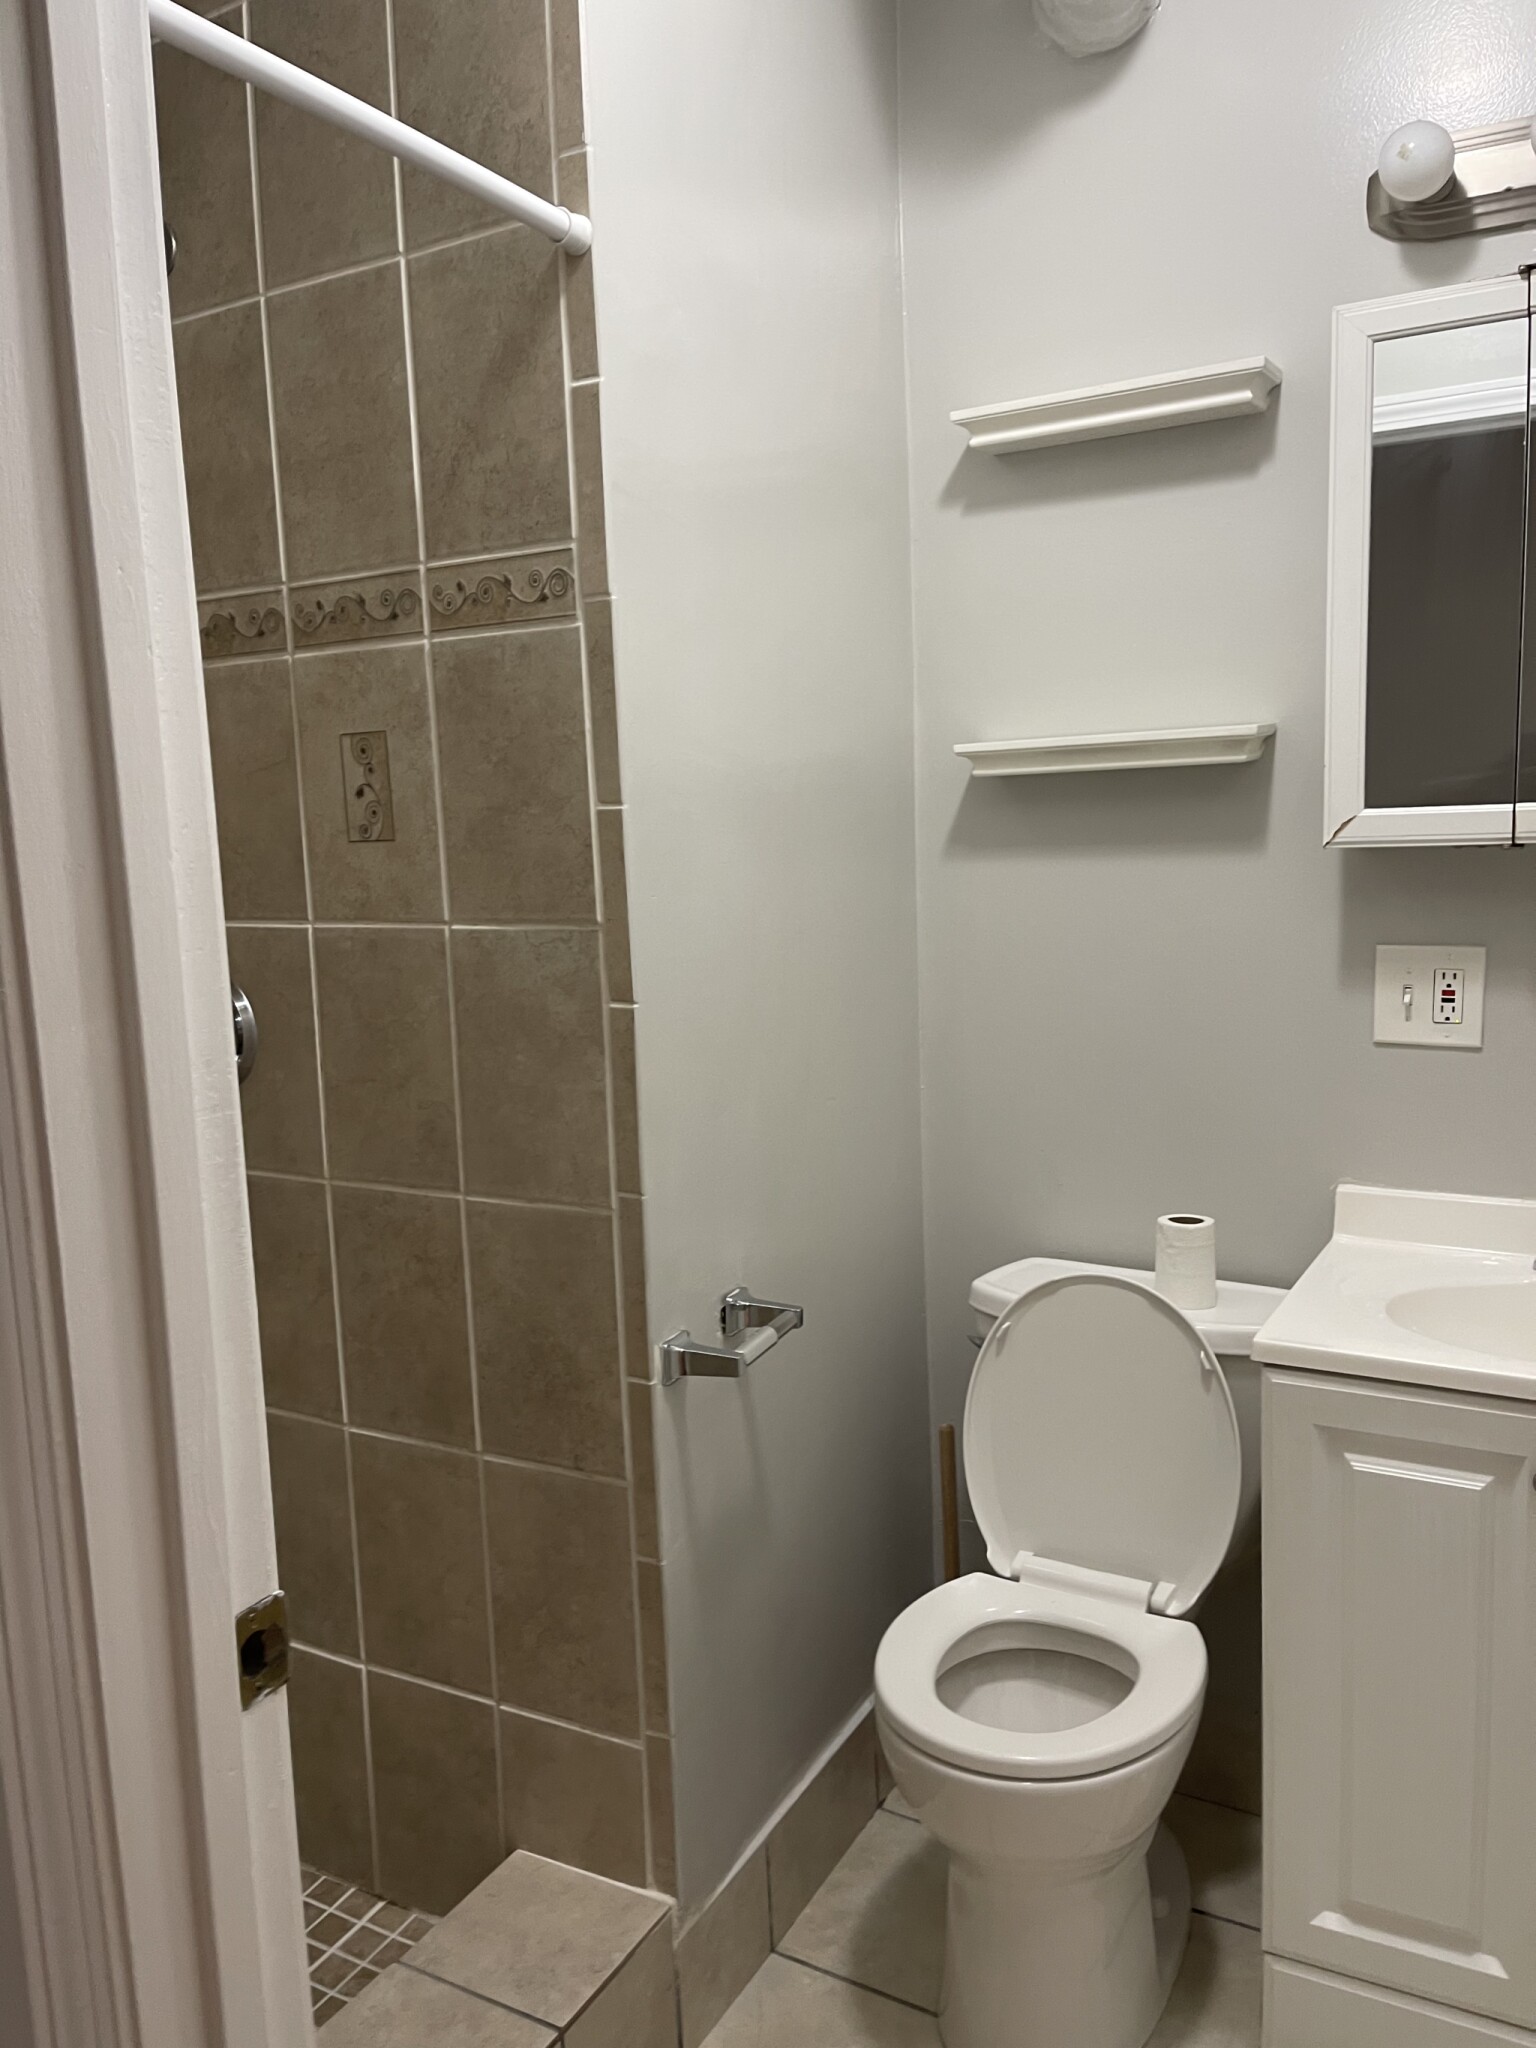 2 Beds, 1 Bath apartment in Boston for $3,400